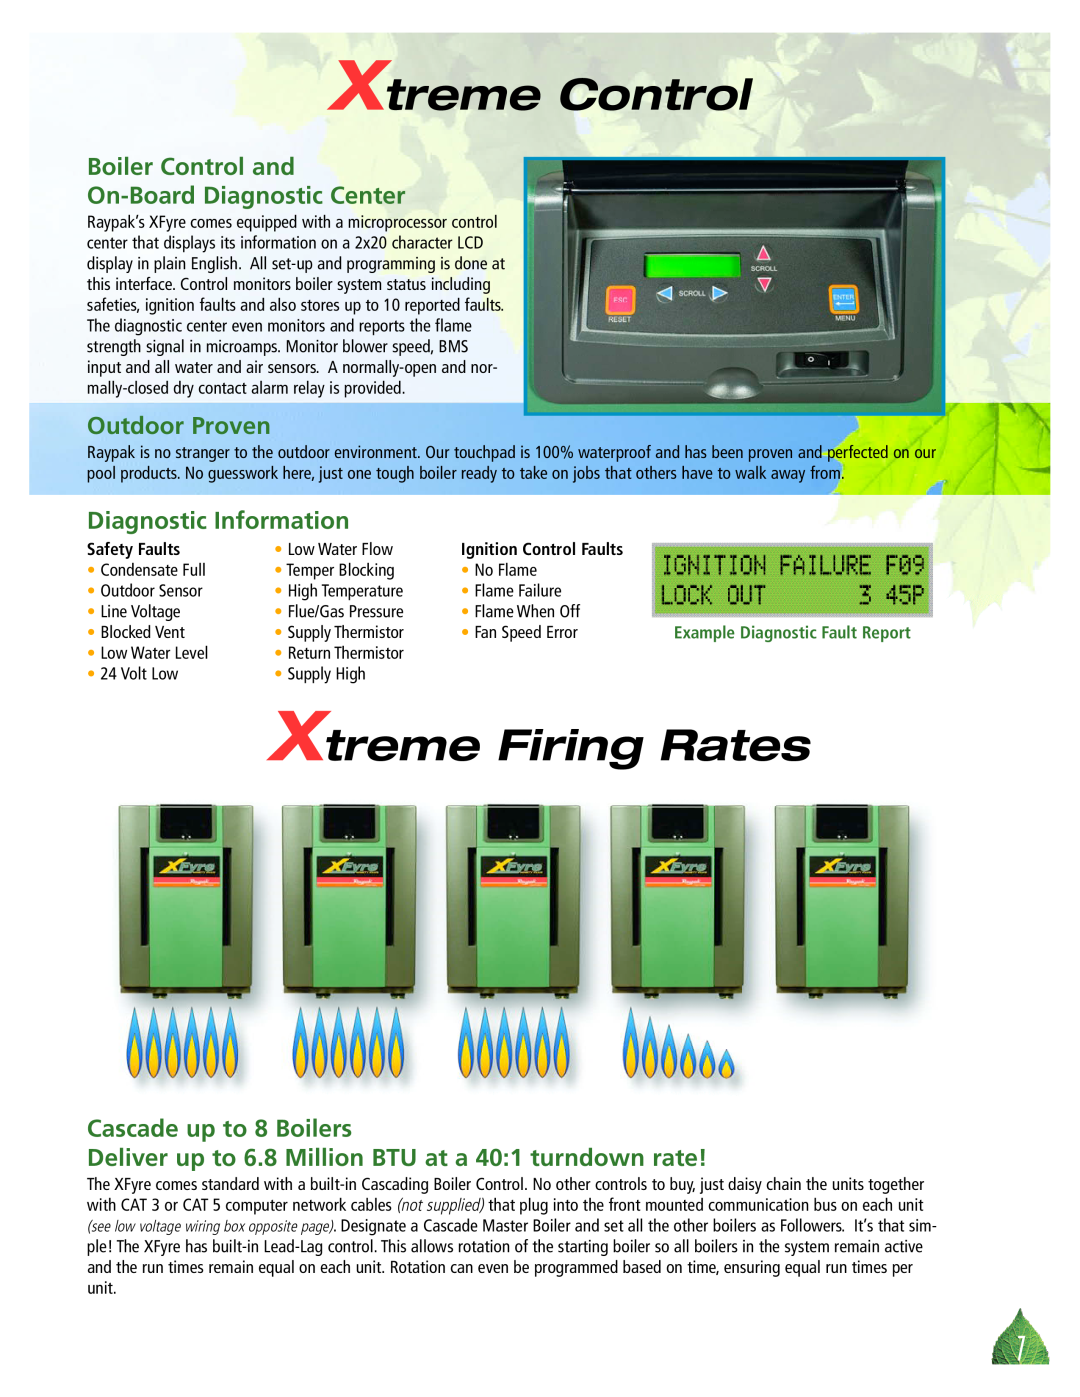 Raypak 500, 850, 300, 700 Xtreme Control, Xtreme Firing Rates, Boiler Control and On-BoardDiagnostic Center, Outdoor Proven 